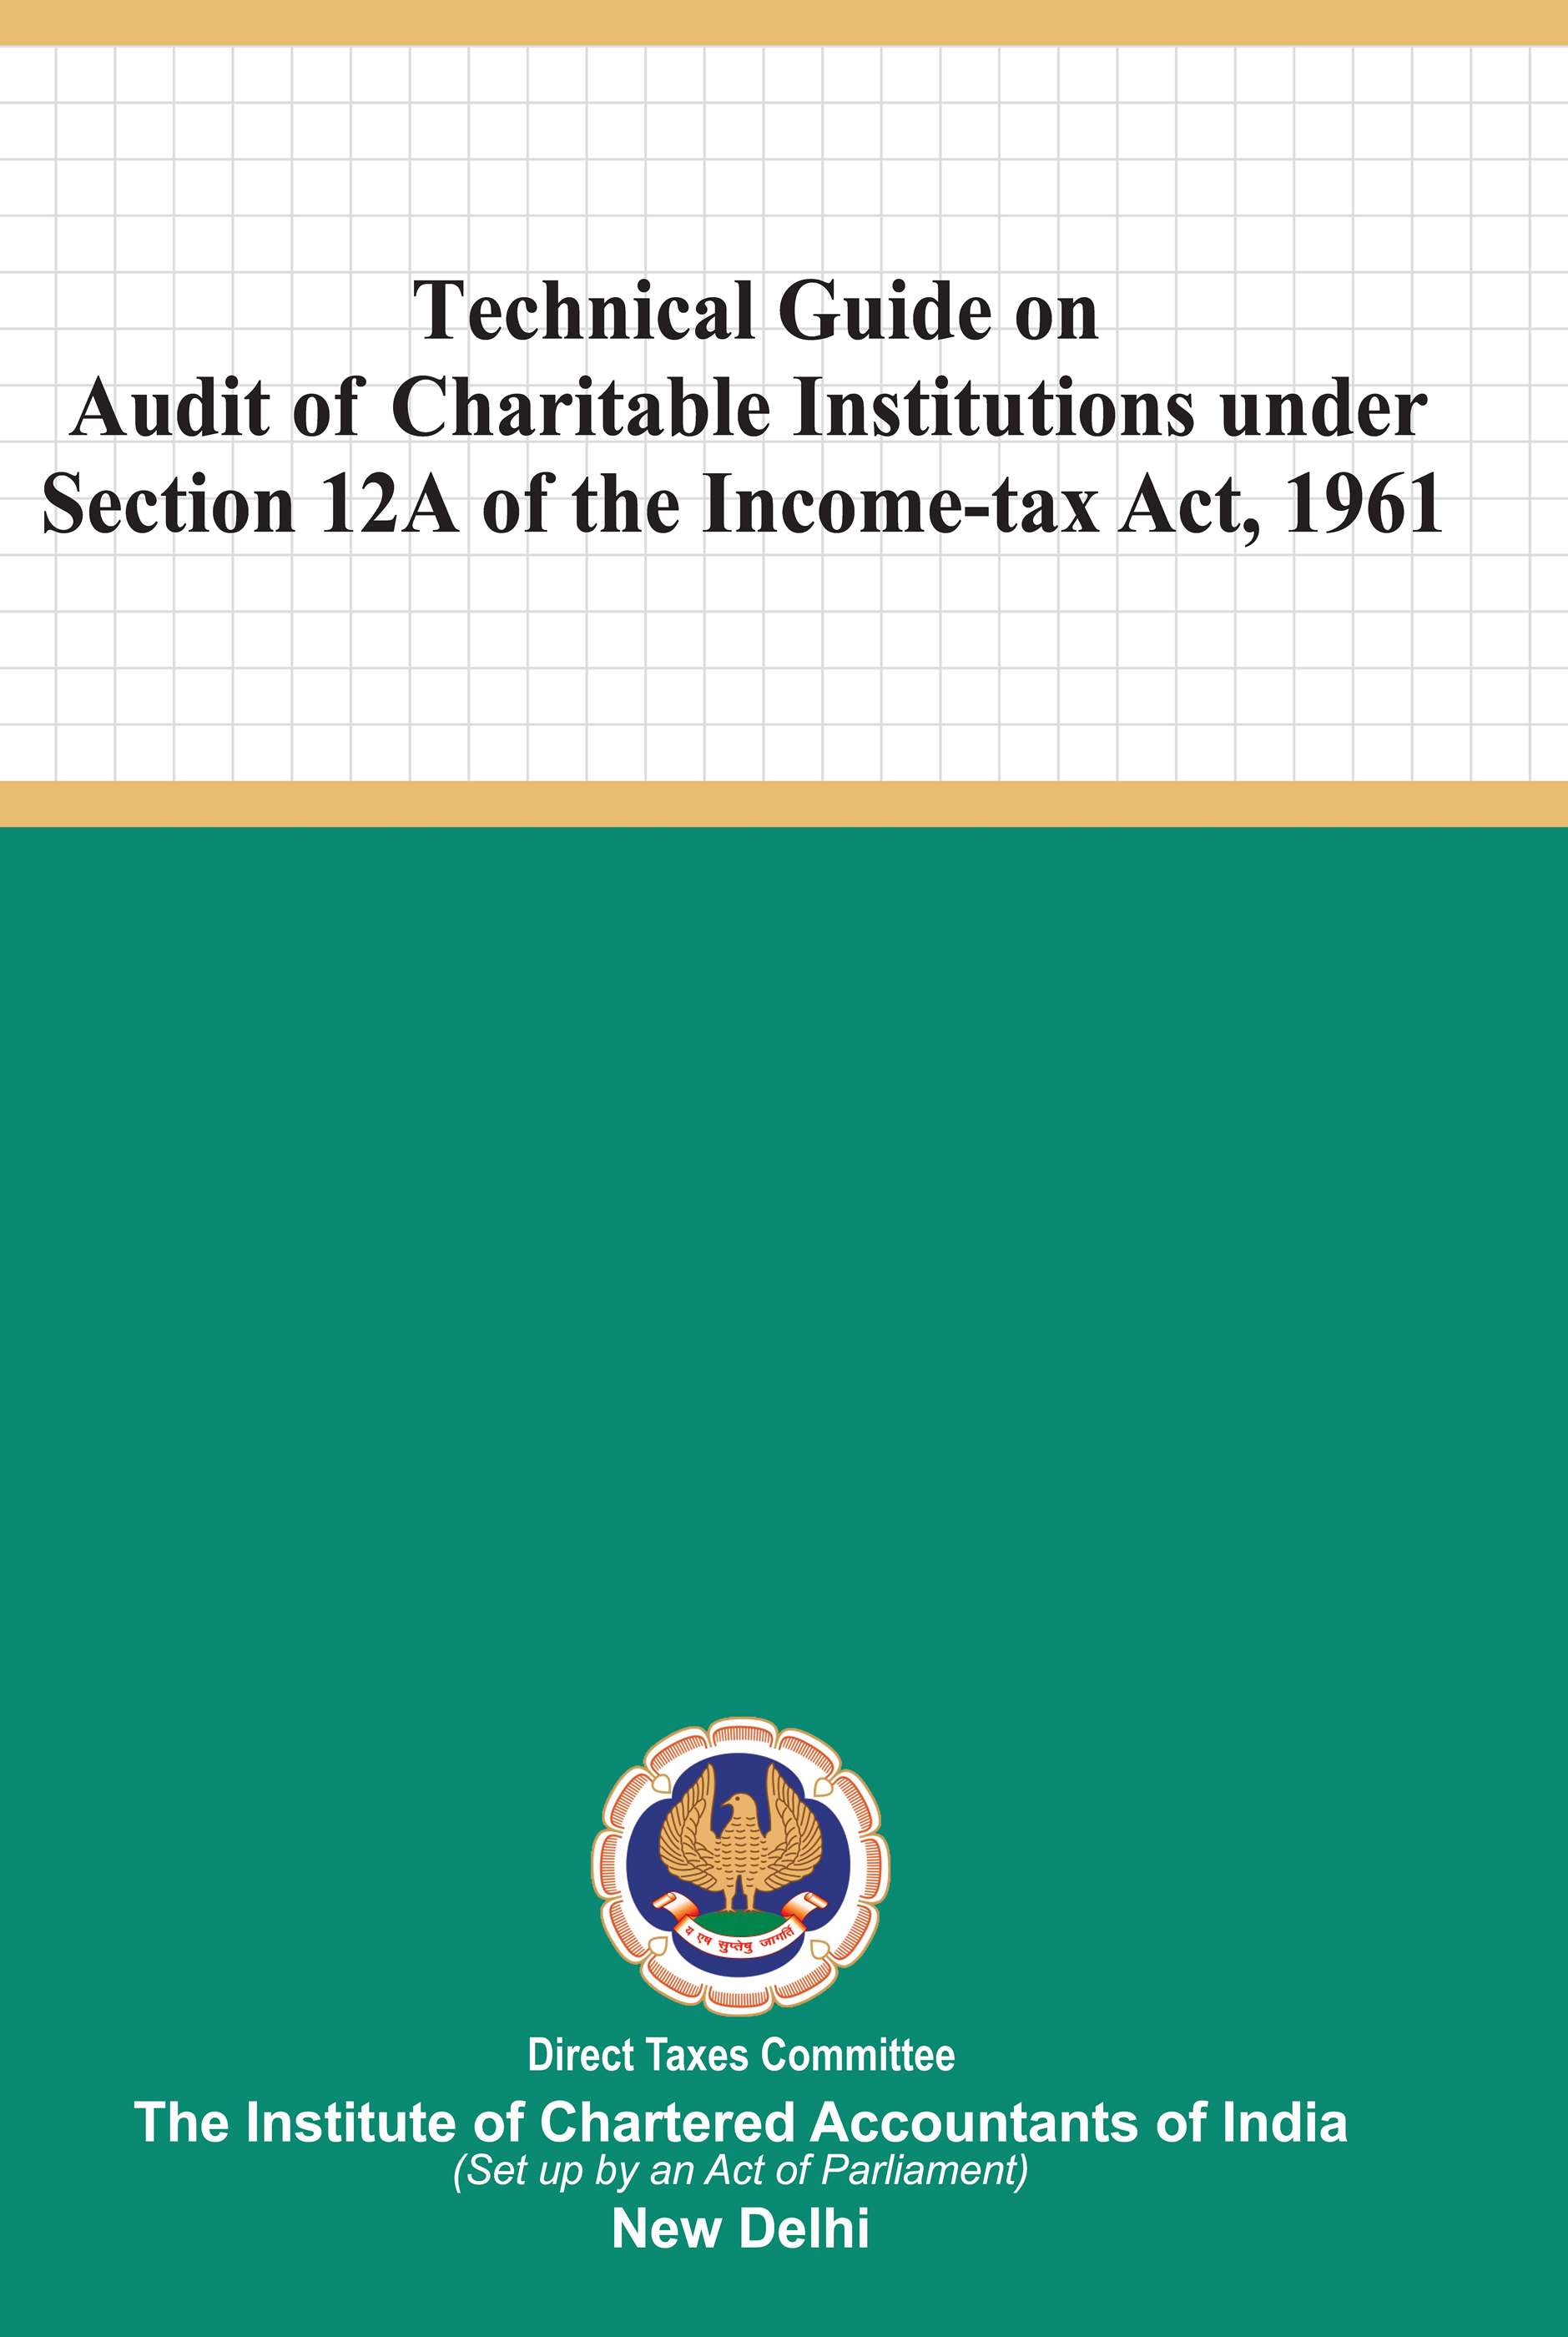 Technical Guide on Audit of Charitable Institutions under Section 12A of the Income-tax Act, 1961 (Sept., 2022)